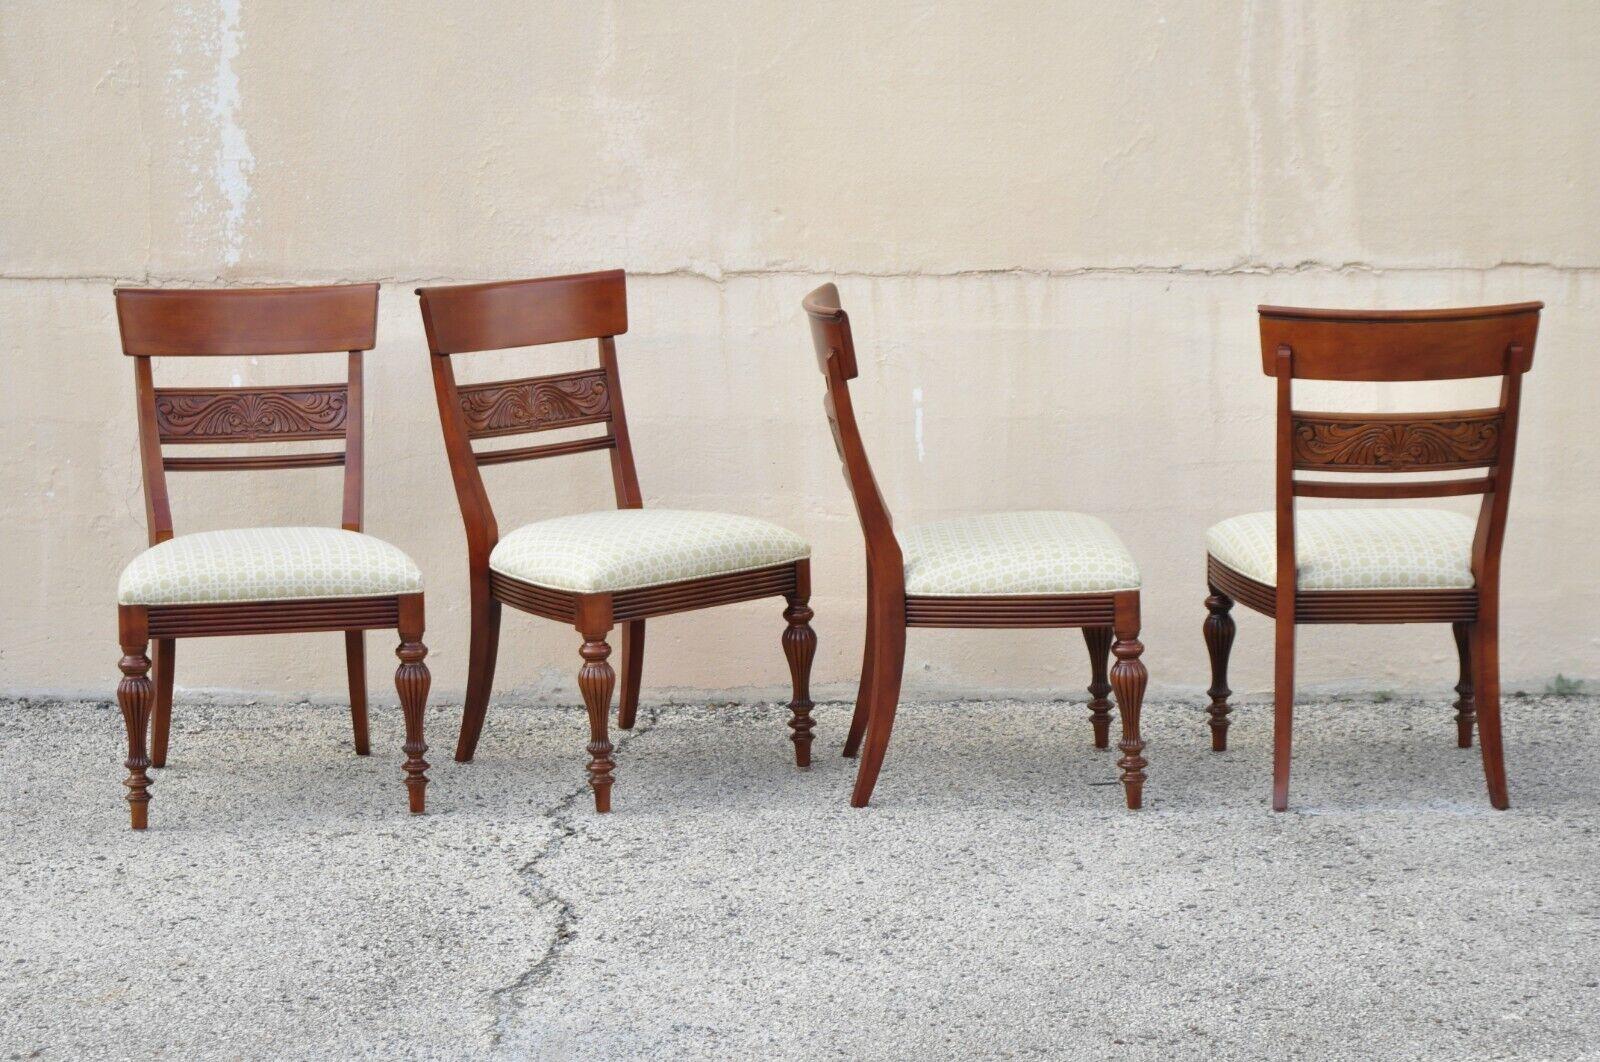 Ethan Allen British Classics Mackenzie dining chairs 29-6500 - Set of 4. Item features green upholstered seats, solid wood frame, beautiful woodgrain, nicely carved details, original label, tapered legs. Circa 2008. Measurements: 37